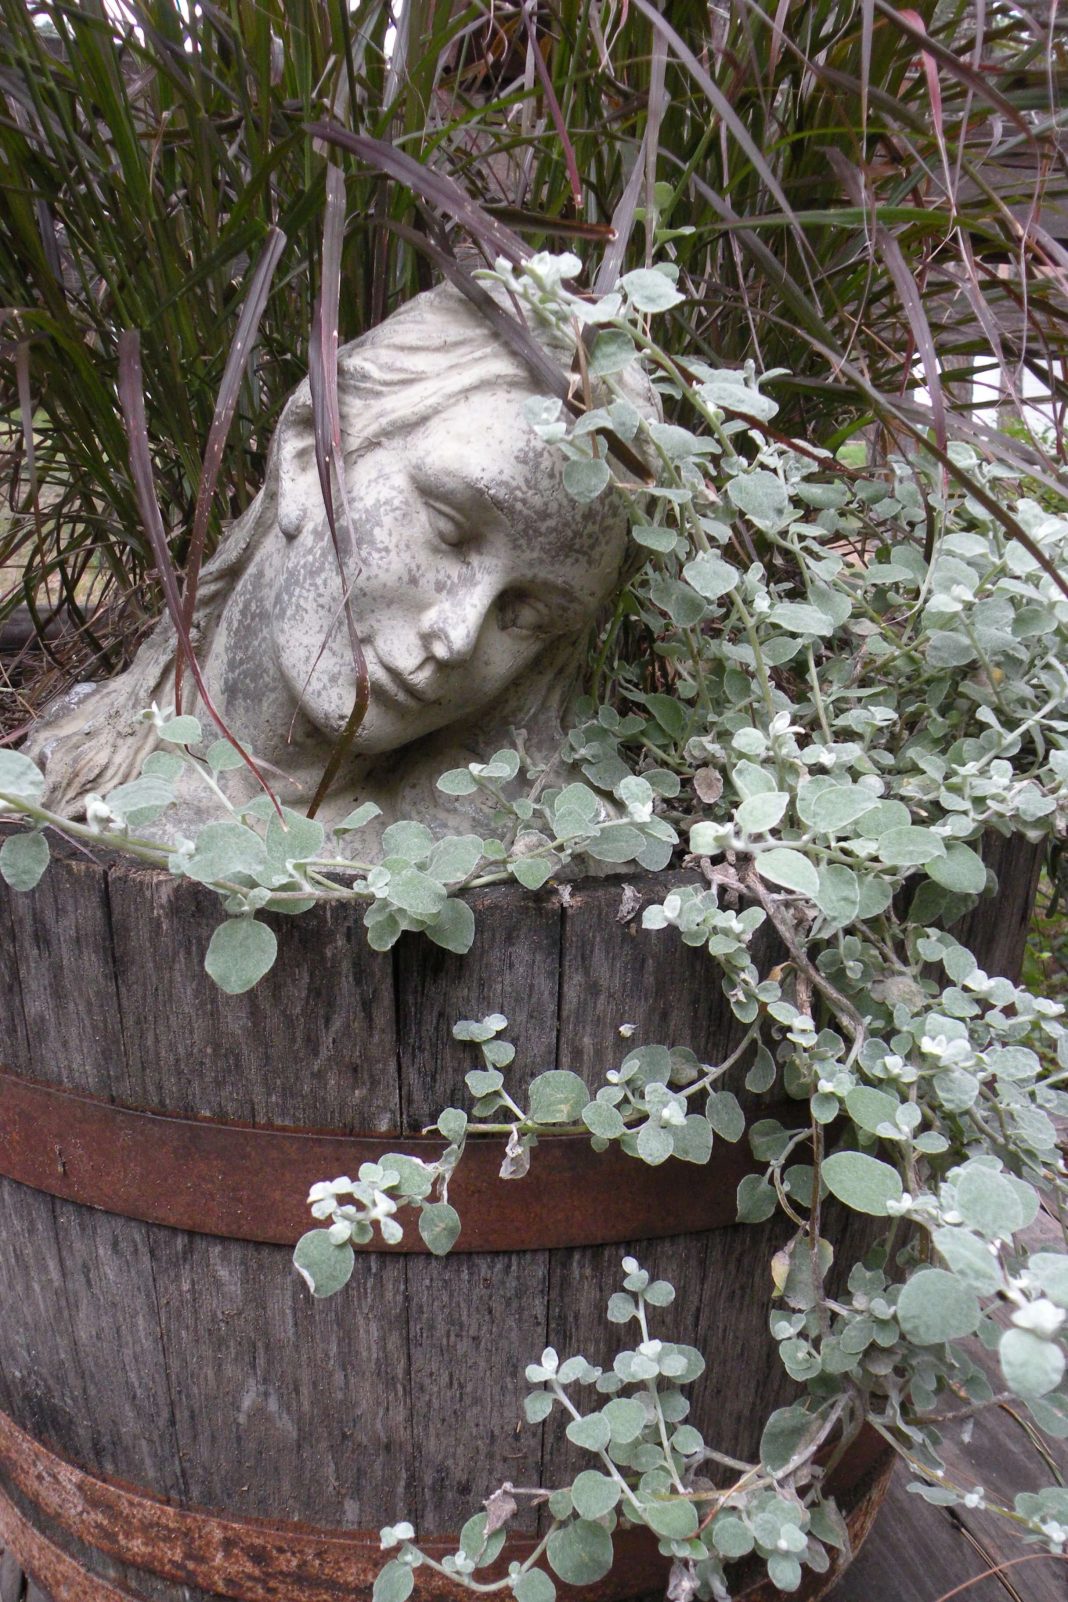 30+ Eye-catching Garden Ornament Ideas & Projects To Enhance Your Backyard